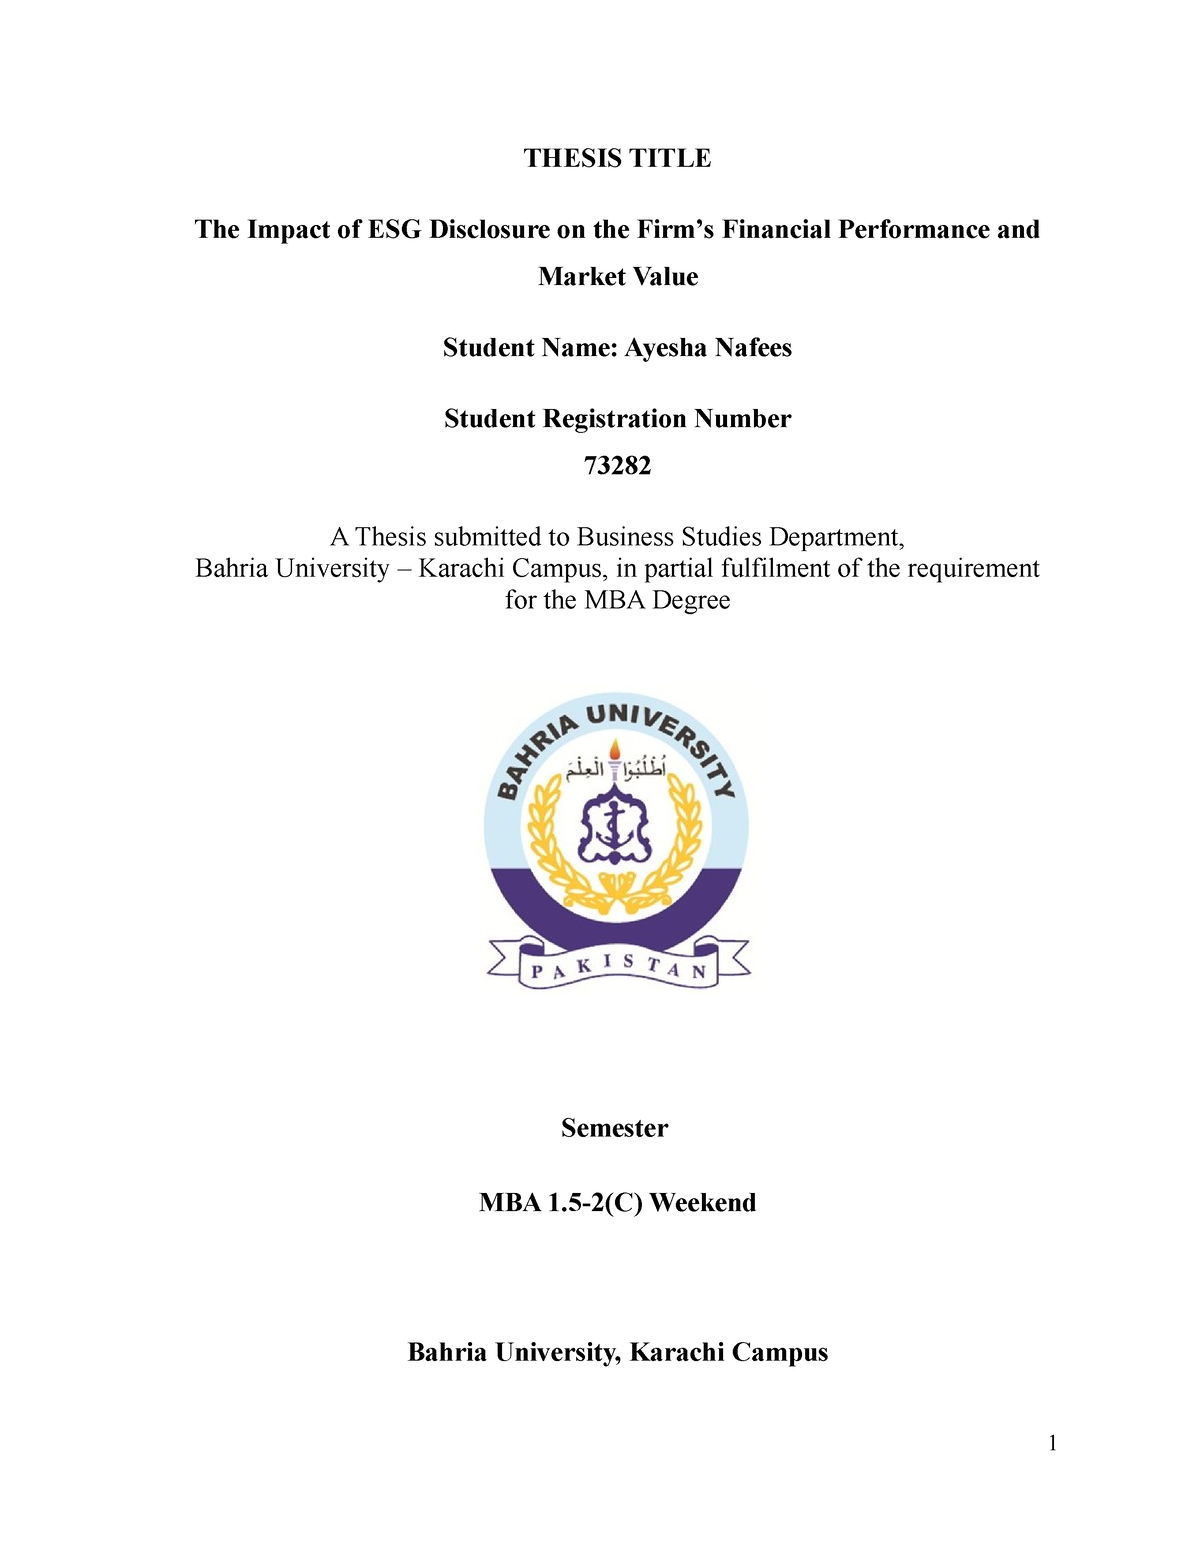 thesis financial performance